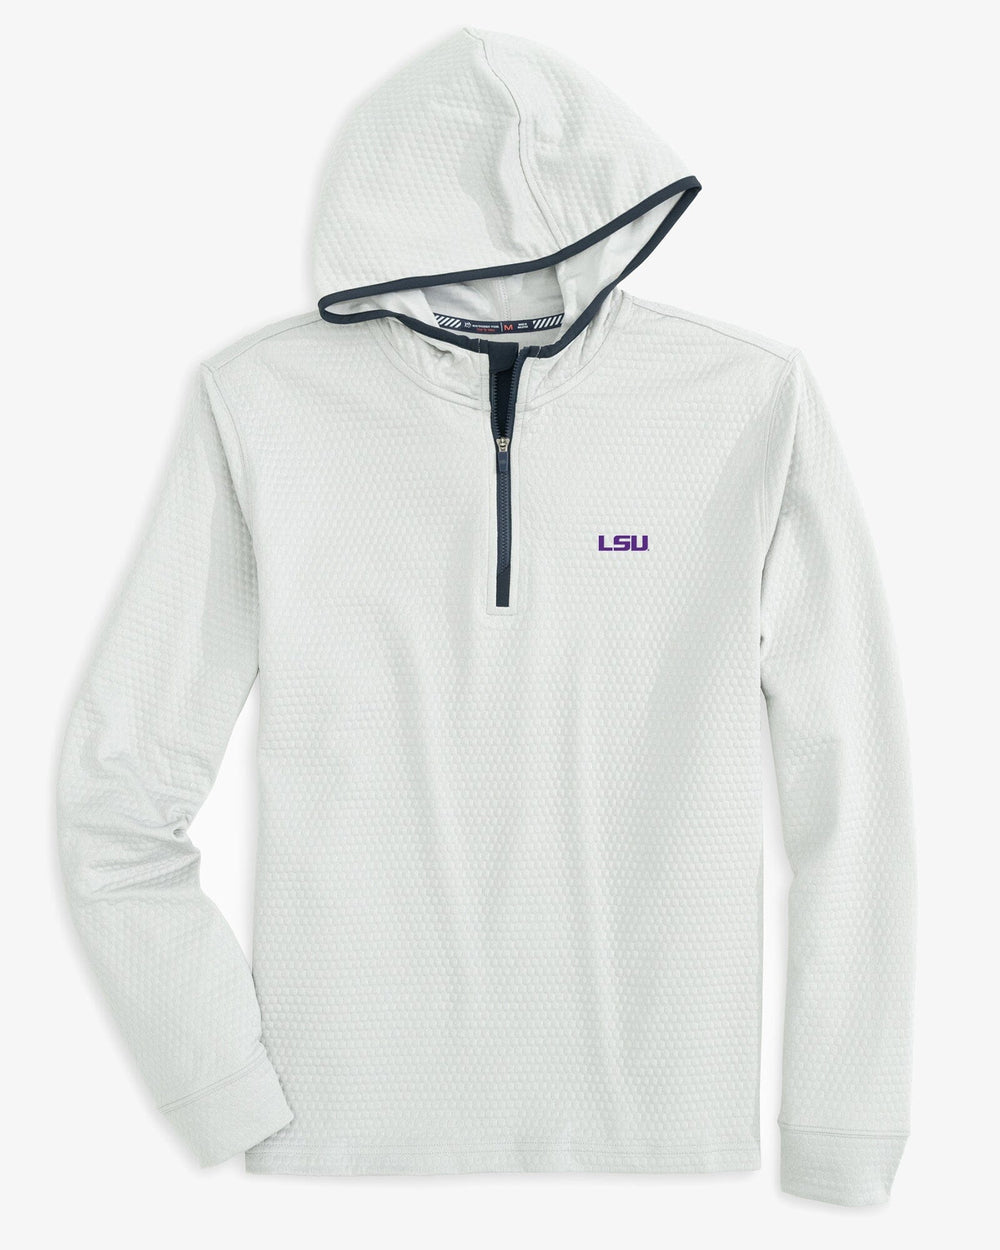 The front view of the LSU Tigers Scuttle Heather Performance Quarter Zip Hoodie by Southern Tide - Heather Slate Grey